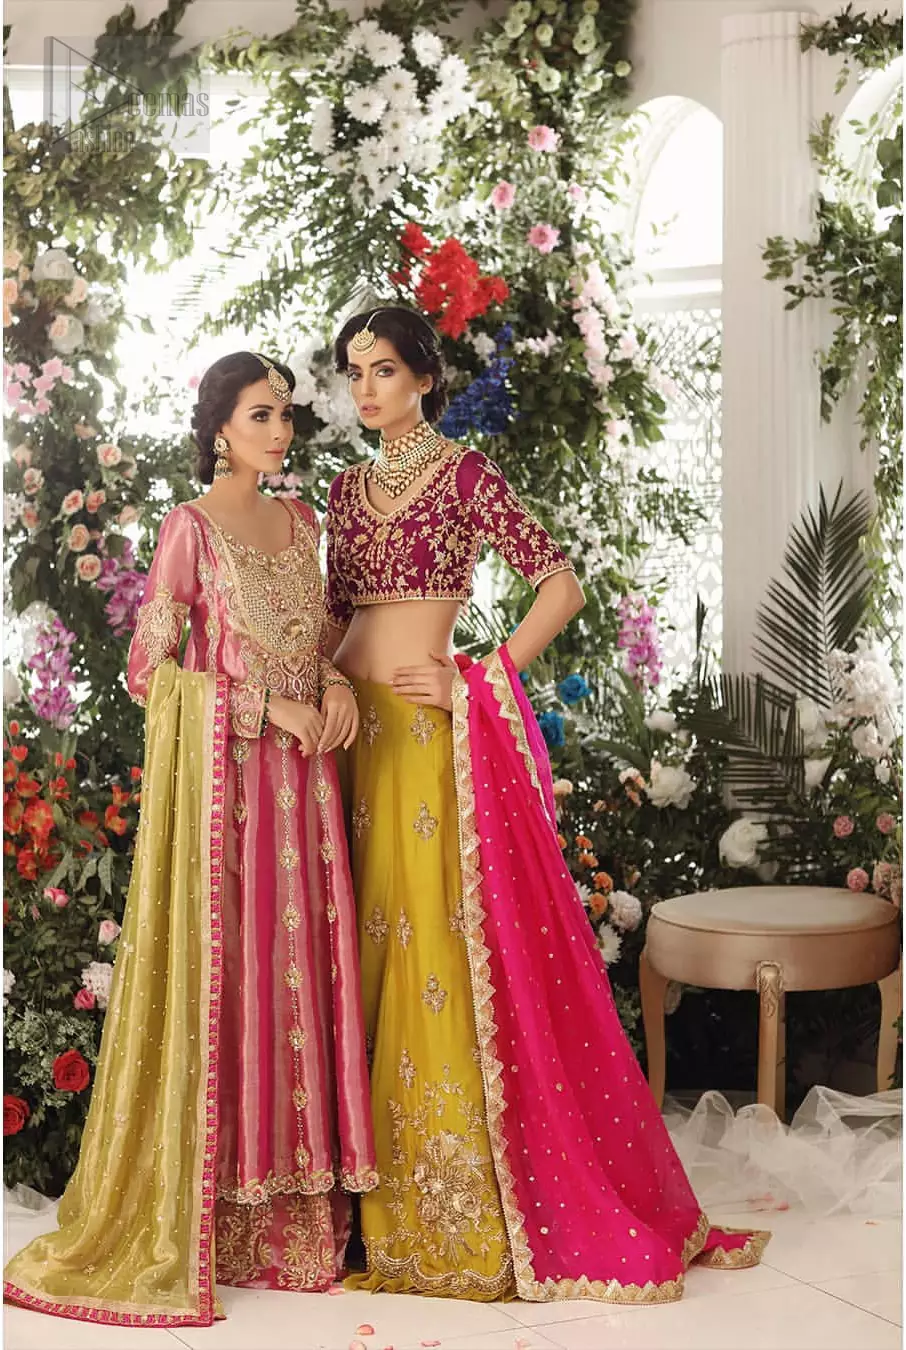 Nothing speaks of femininity and class louder than this mehndi outfits for bridesmaids. This beautiful mehndi dress comes with anarkali frock with beautiful embellished motifs around the scalloped hemline and vertically worked gold lines and heavily embellished neckline with light golden, champagne and antique shaded zardozi work. It comes with sharara adorned with colored floral embroidery with champagne embellishment. Complete the look with parrot green dupatta having four sided applique borders and sequins spray on the ground.